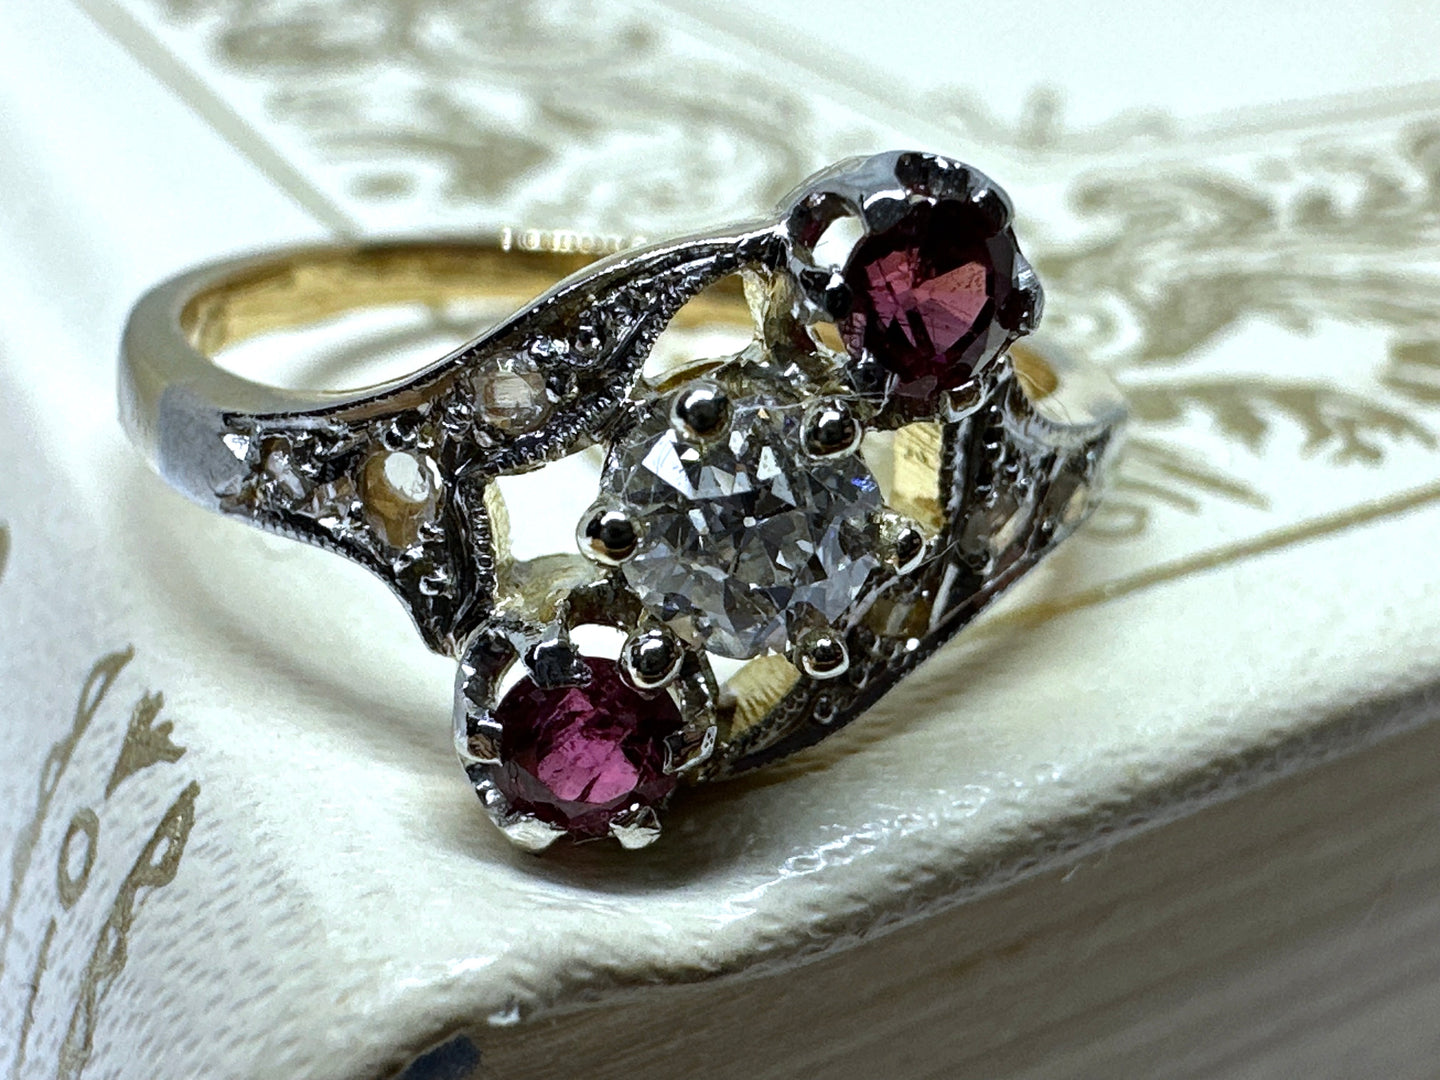 FRENCH ART NOUVEAU DIAMOND AND RUBY RING IN 18KT YELLOW GOLD